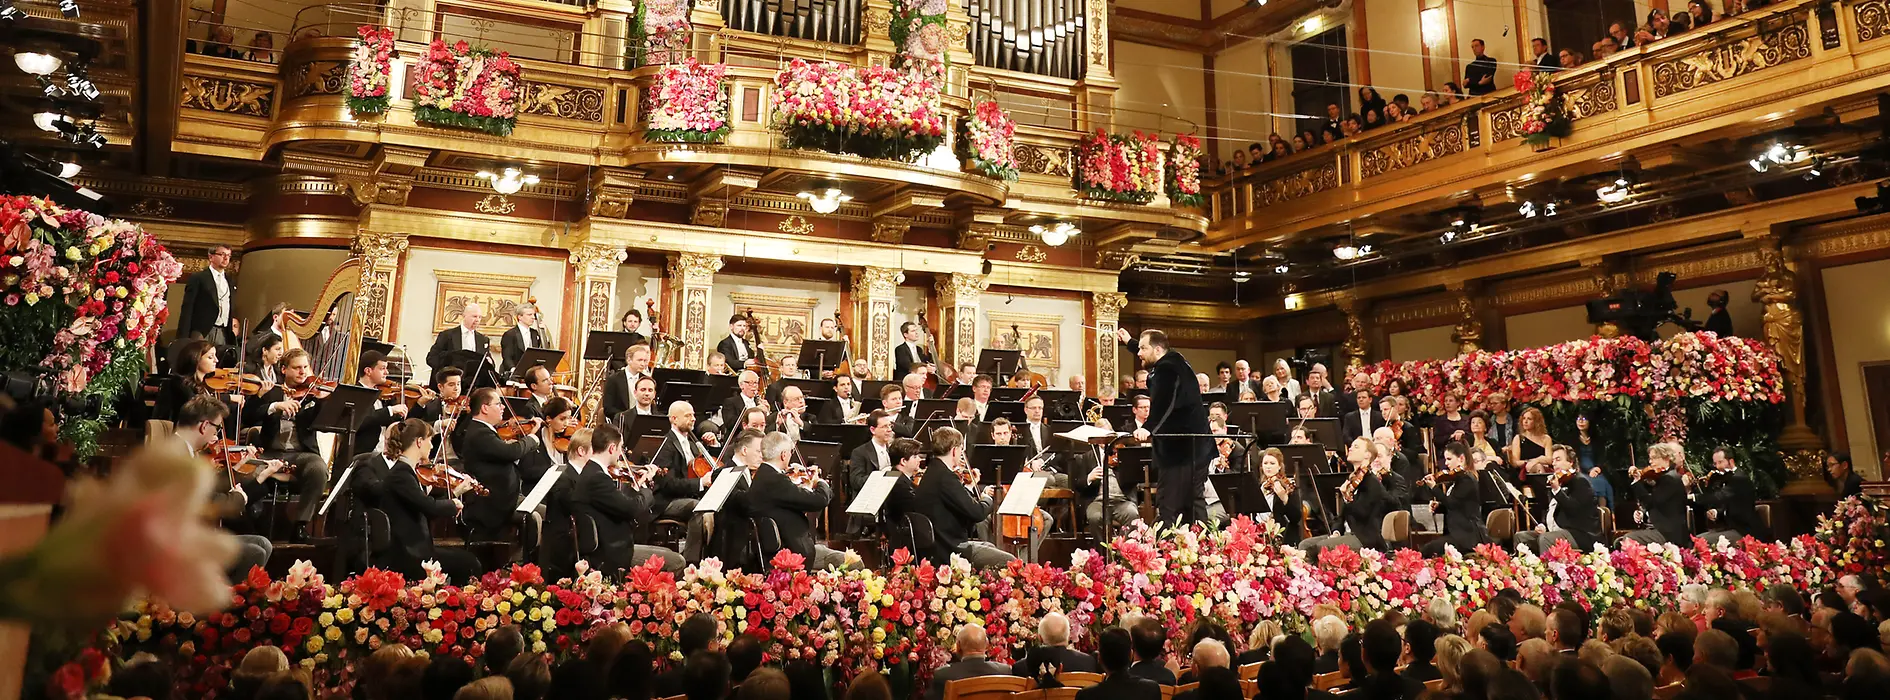 19-facts-about-vienna-new-years-concert